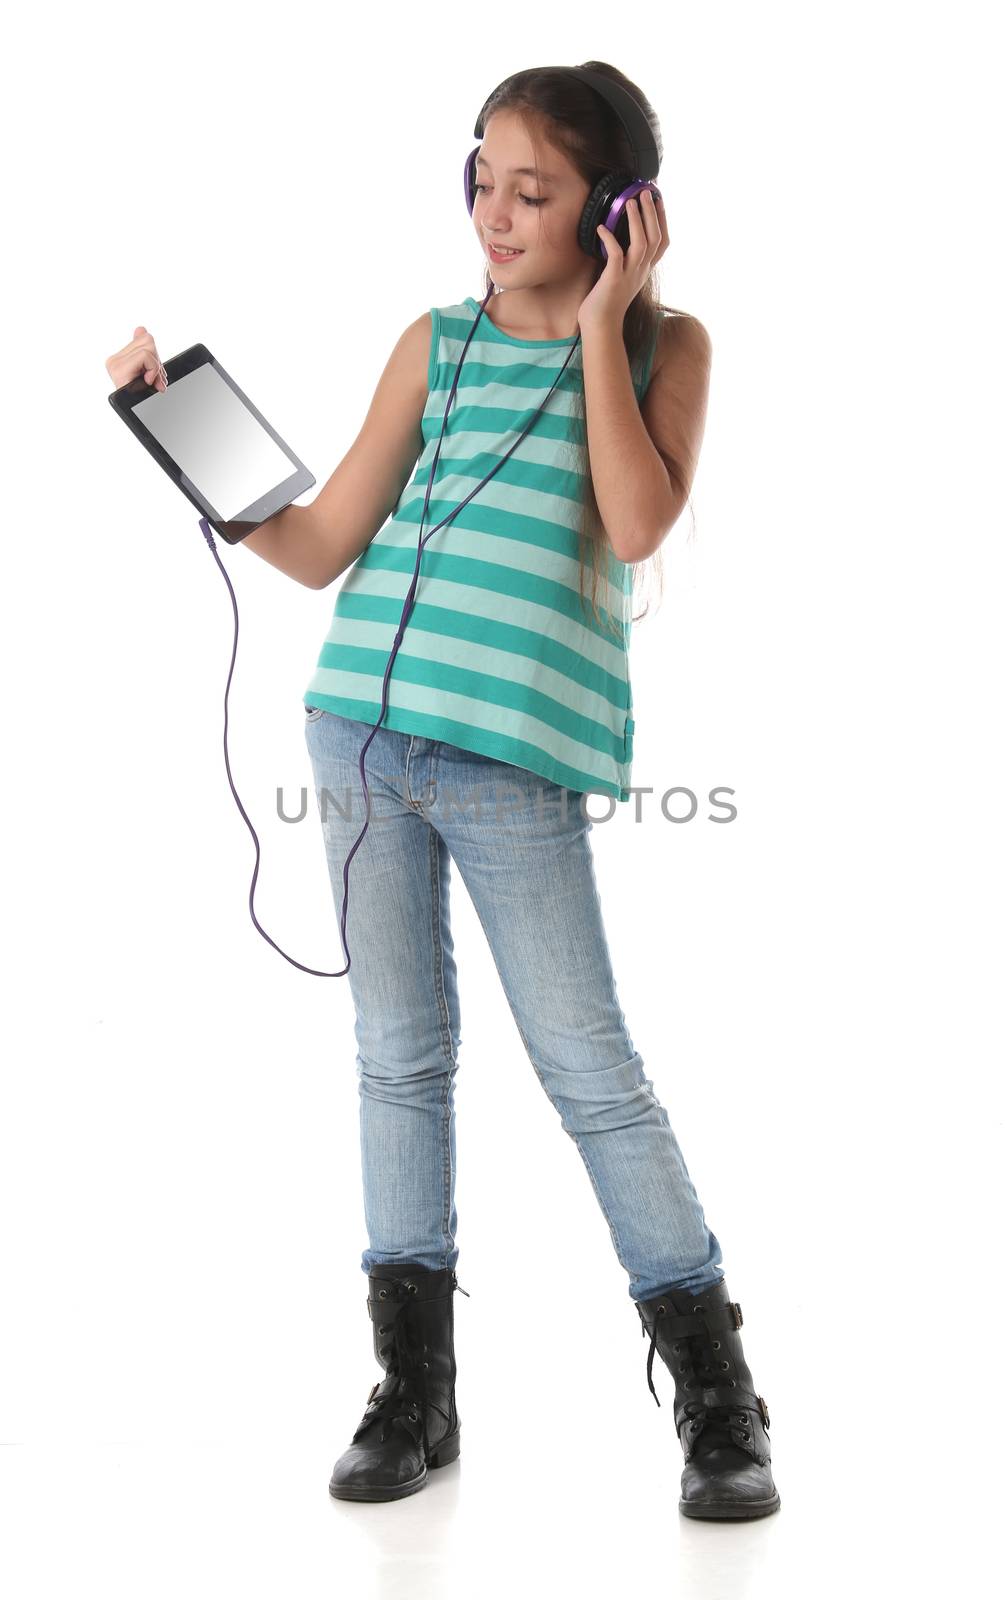 Beautiful pre-teen girl using a tablet computer and headphones. by Erdosain